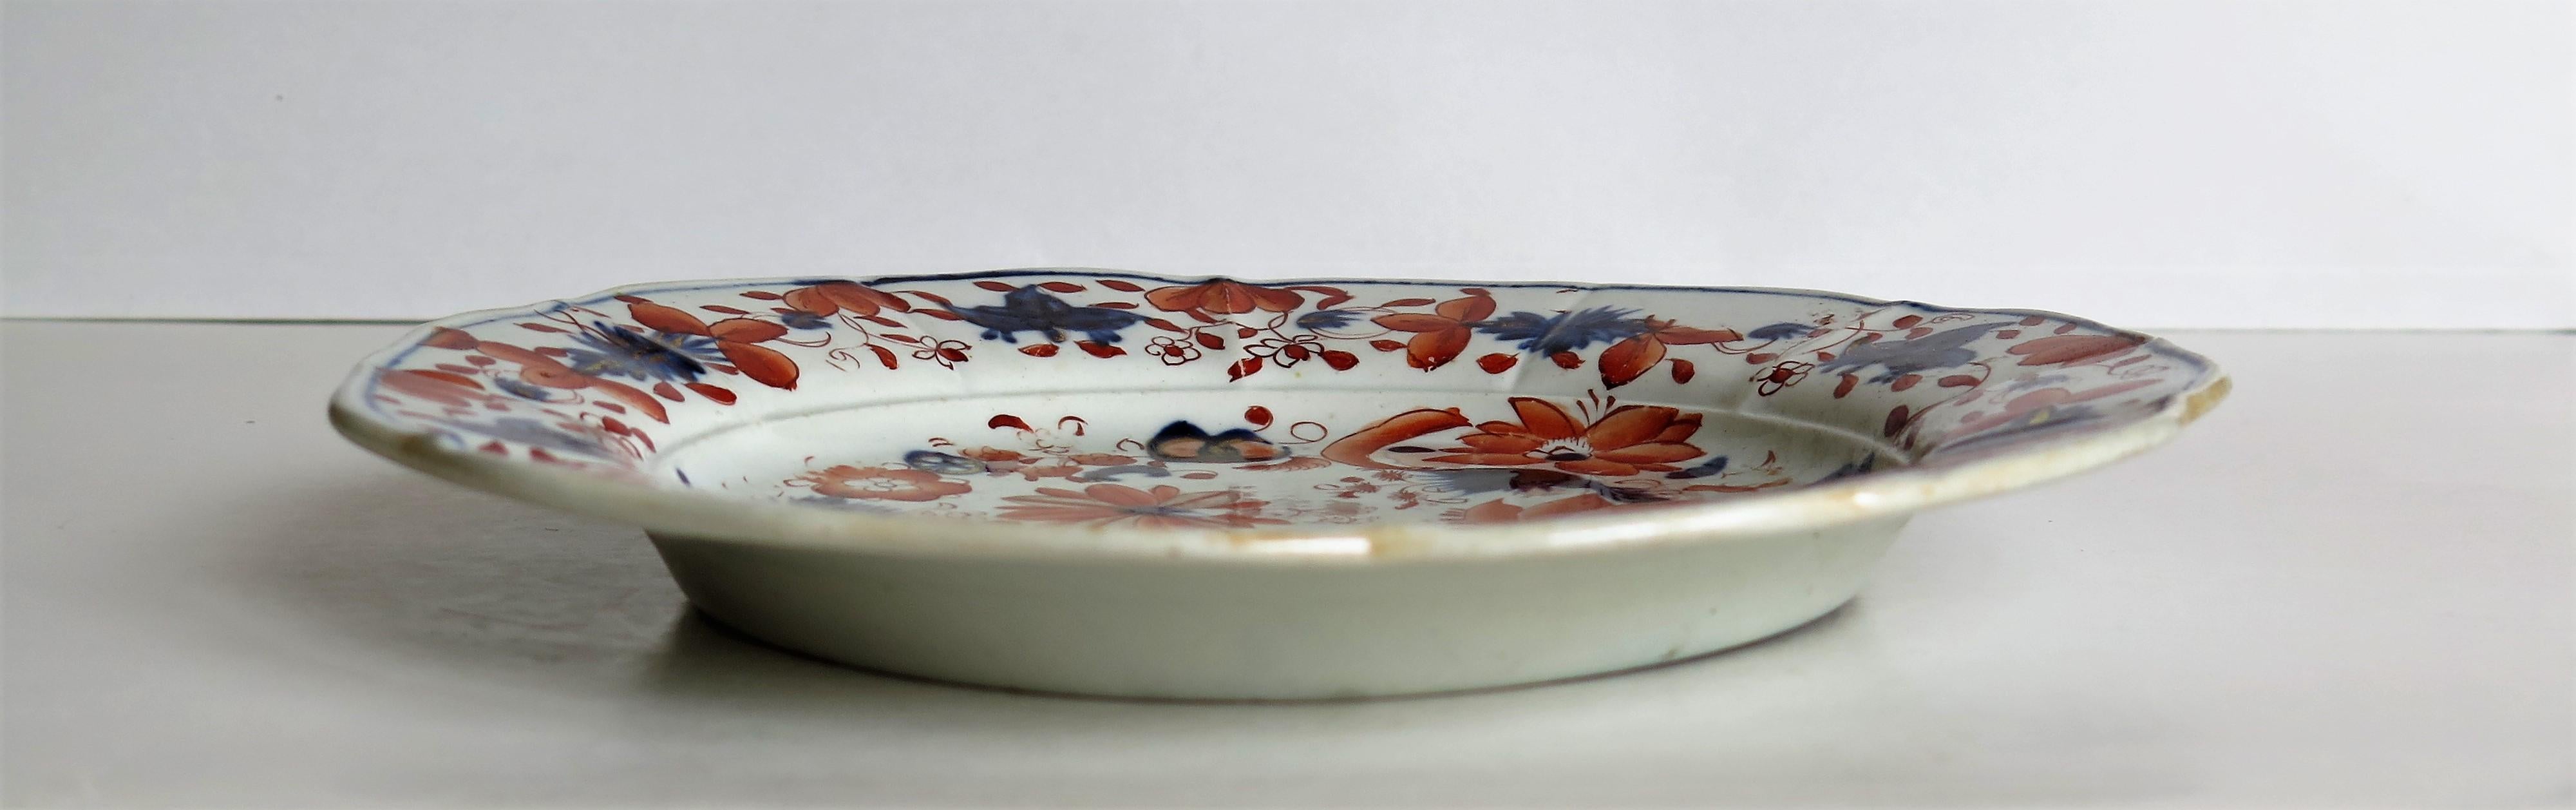 Early Mason's Ironstone Dish or Plate Flowers and Wheels Rare Pattern Circa 1815 2